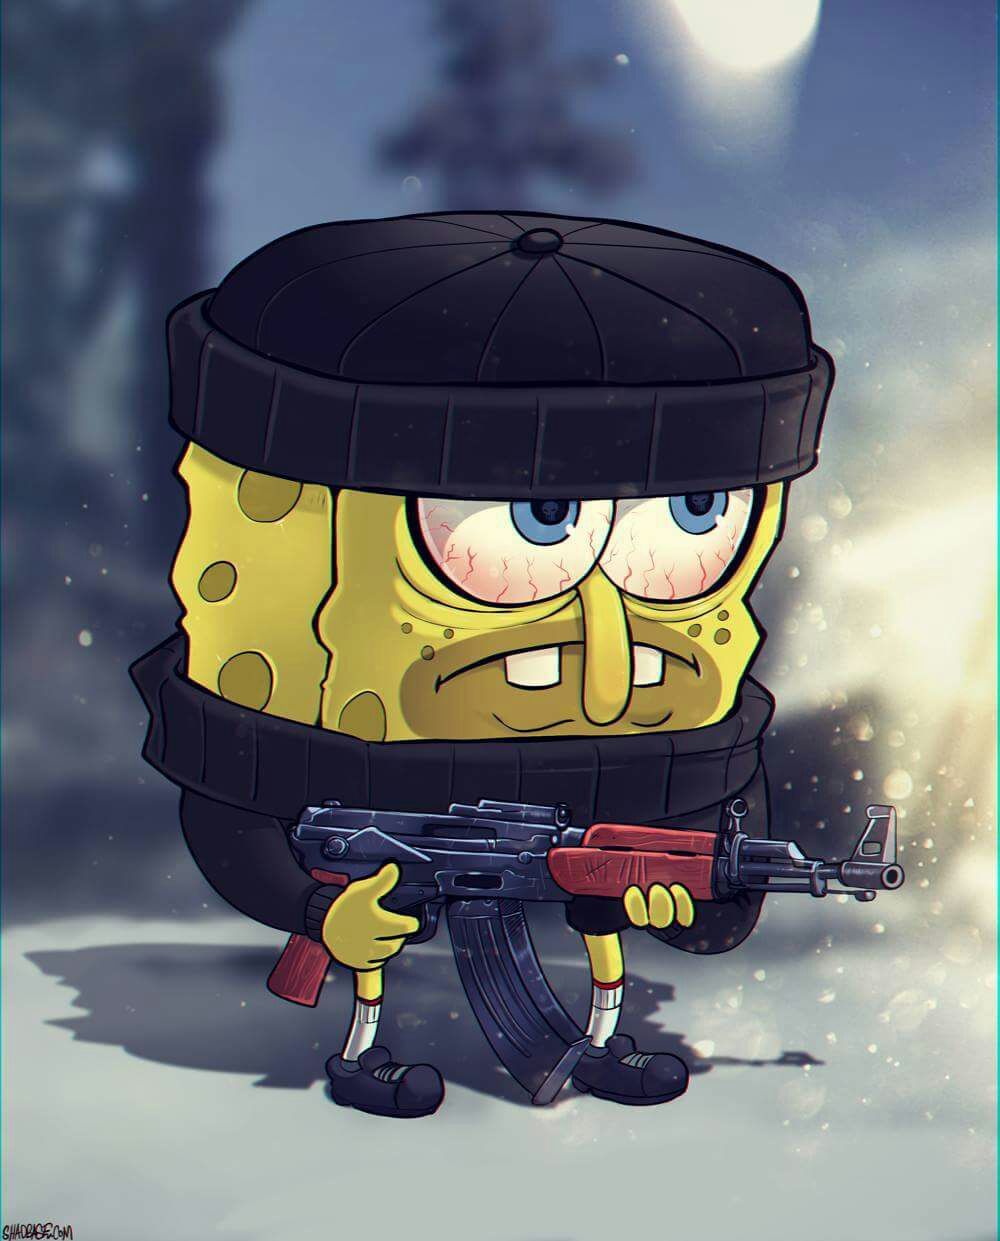 dont come to the krusty krab tomorrow...